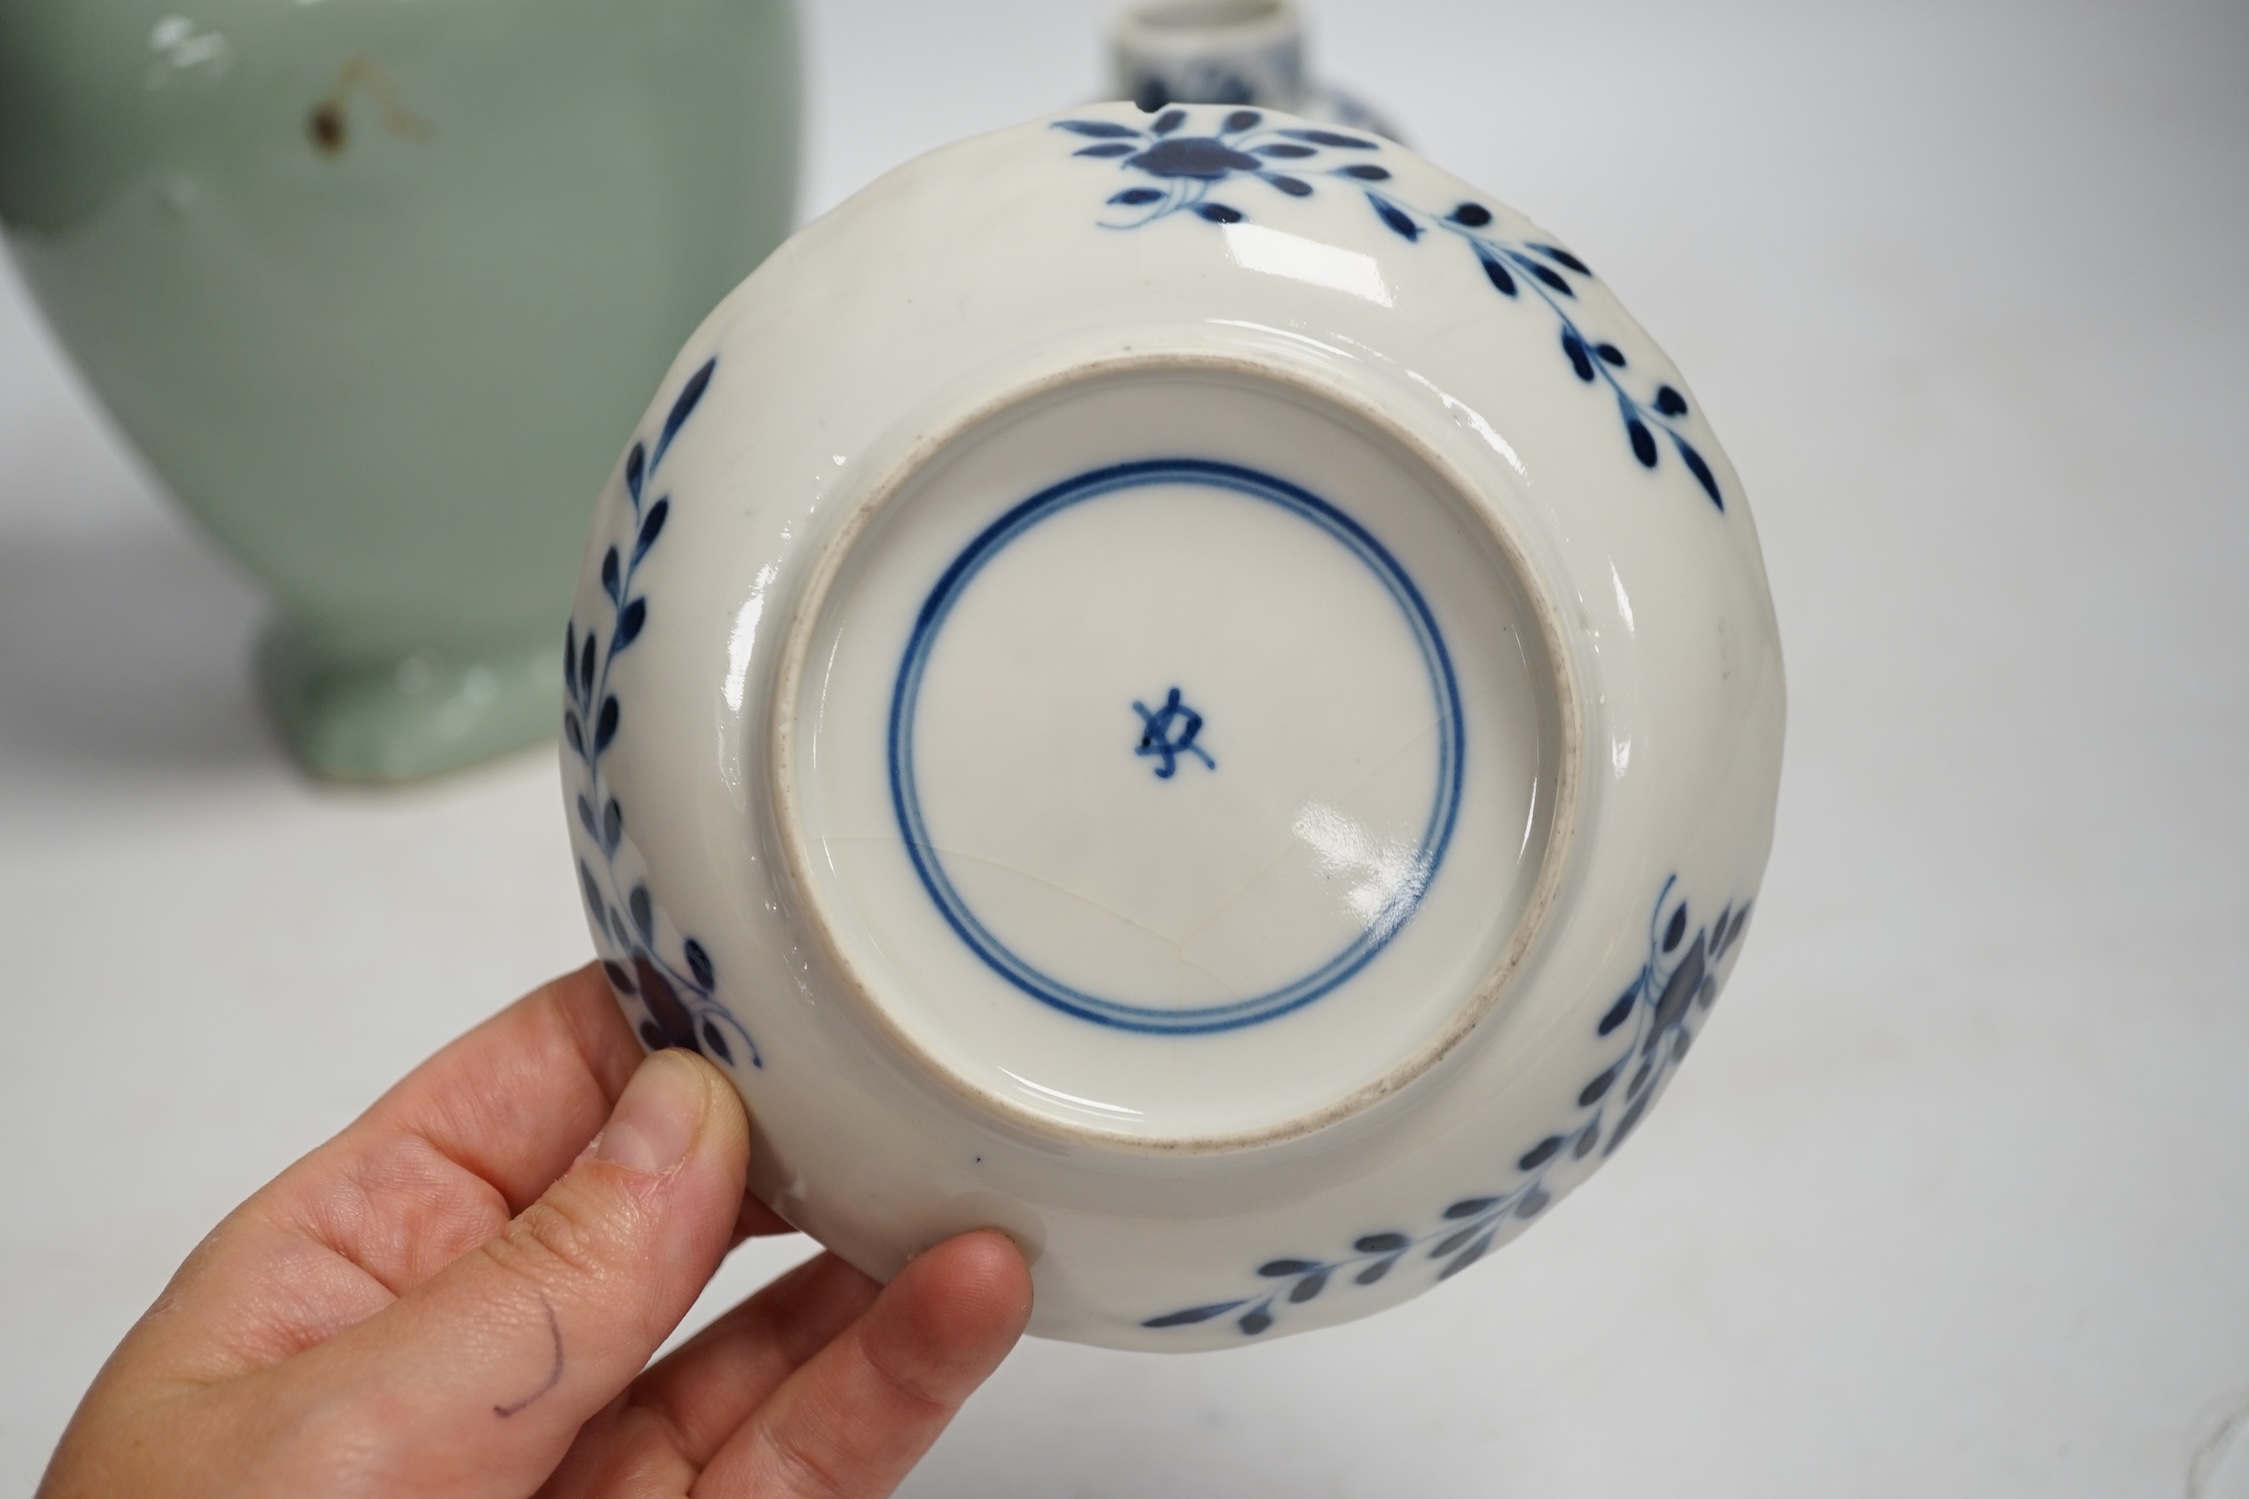 A Chinese celadon glazed two handled vase and a Chinese blue and white vase and dish, celadon vase 28.5cm high. Condition - celadon vase has a firing flaw and large crack, both blue and white vase are in damaged conditio